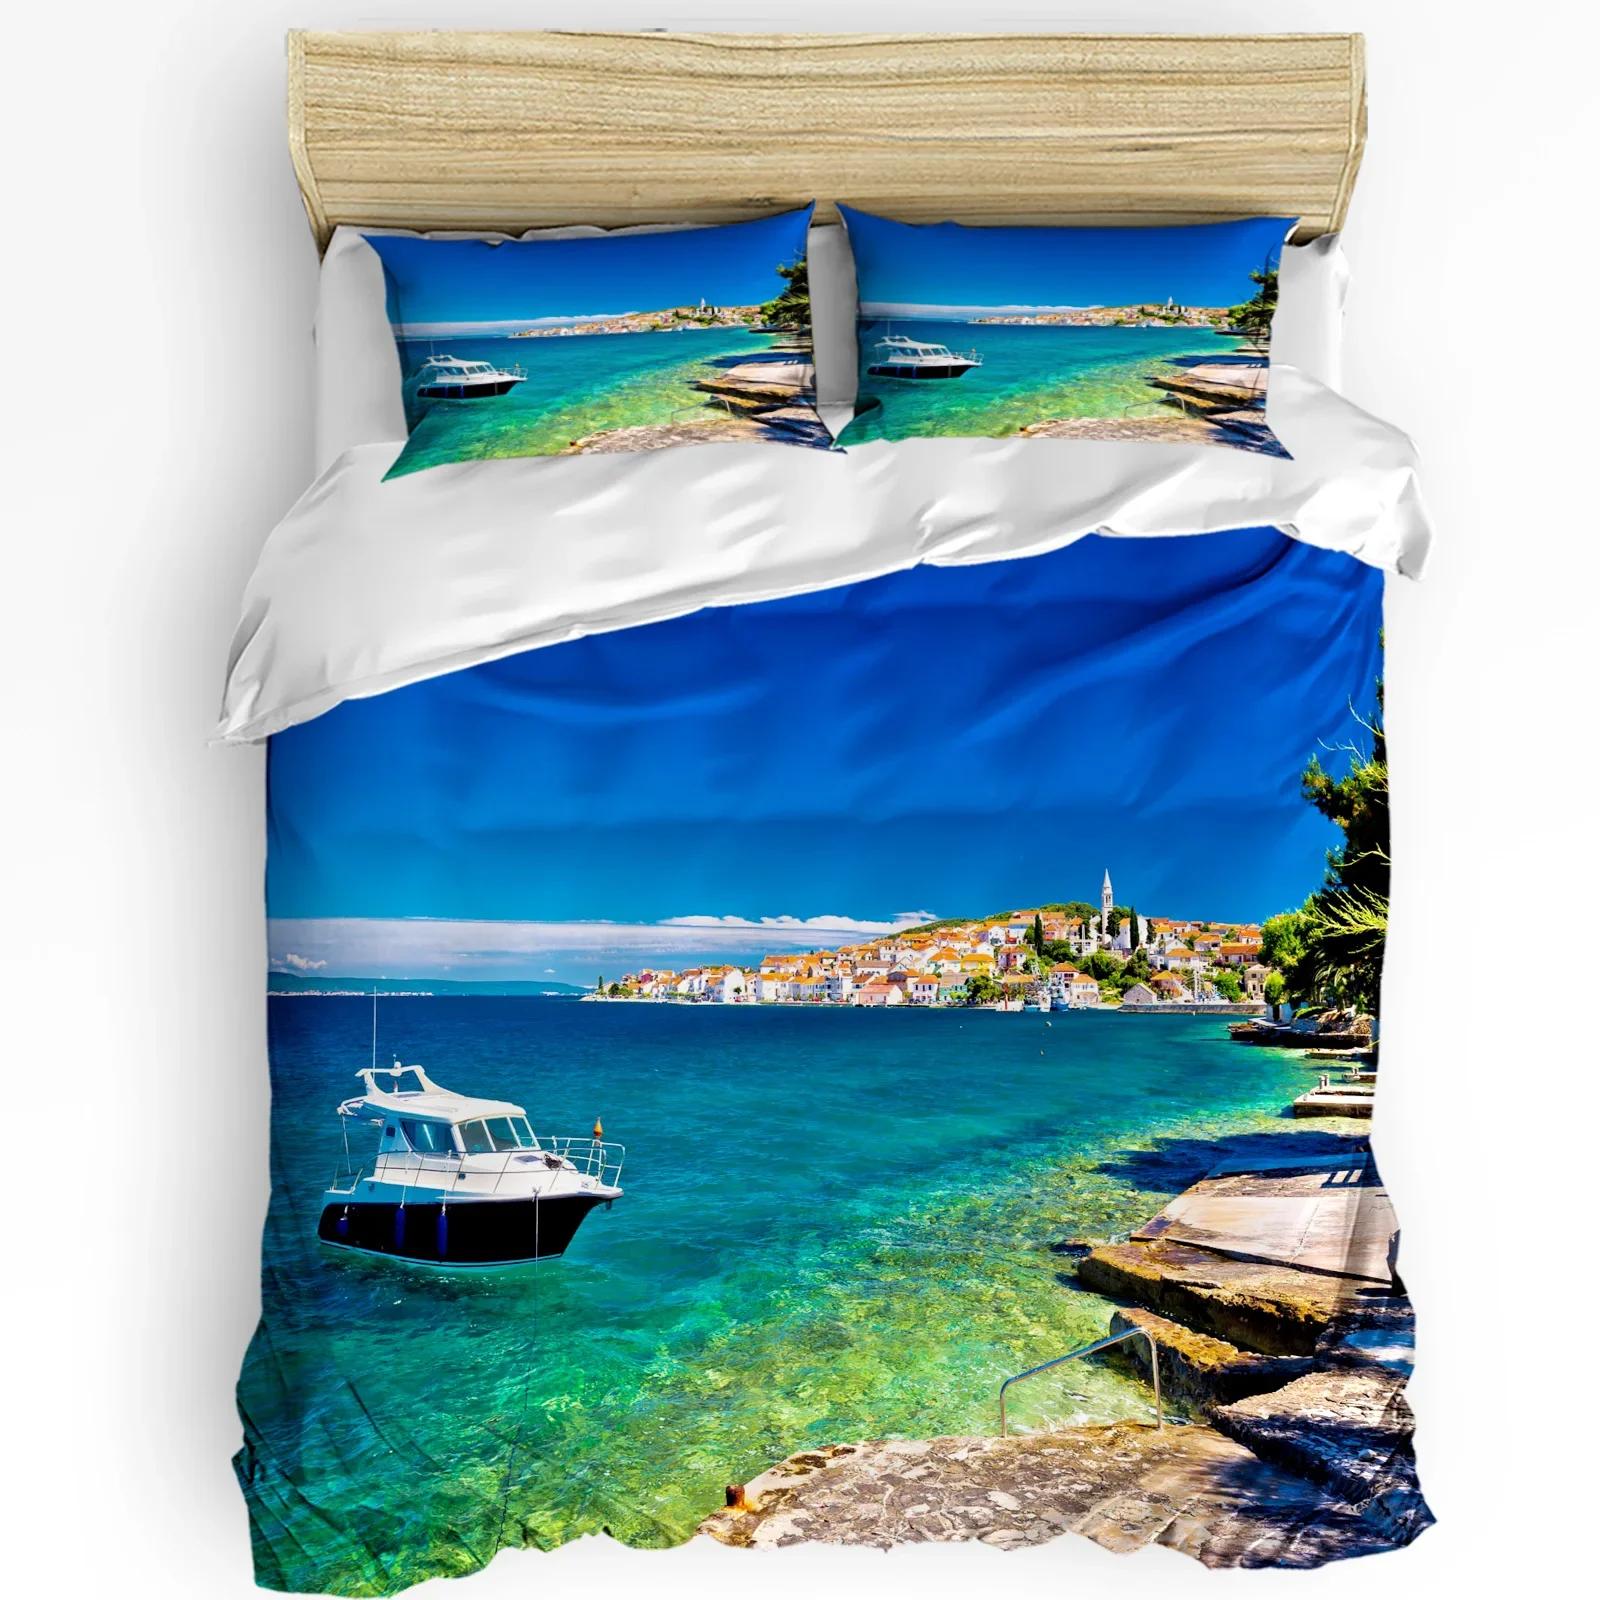 Beach Boat Houses Printed Comfort Duvet Cover Pillow Case Home Textile Quilt Cover Boy Kid Teen Girl Luxury 3pcs Bed